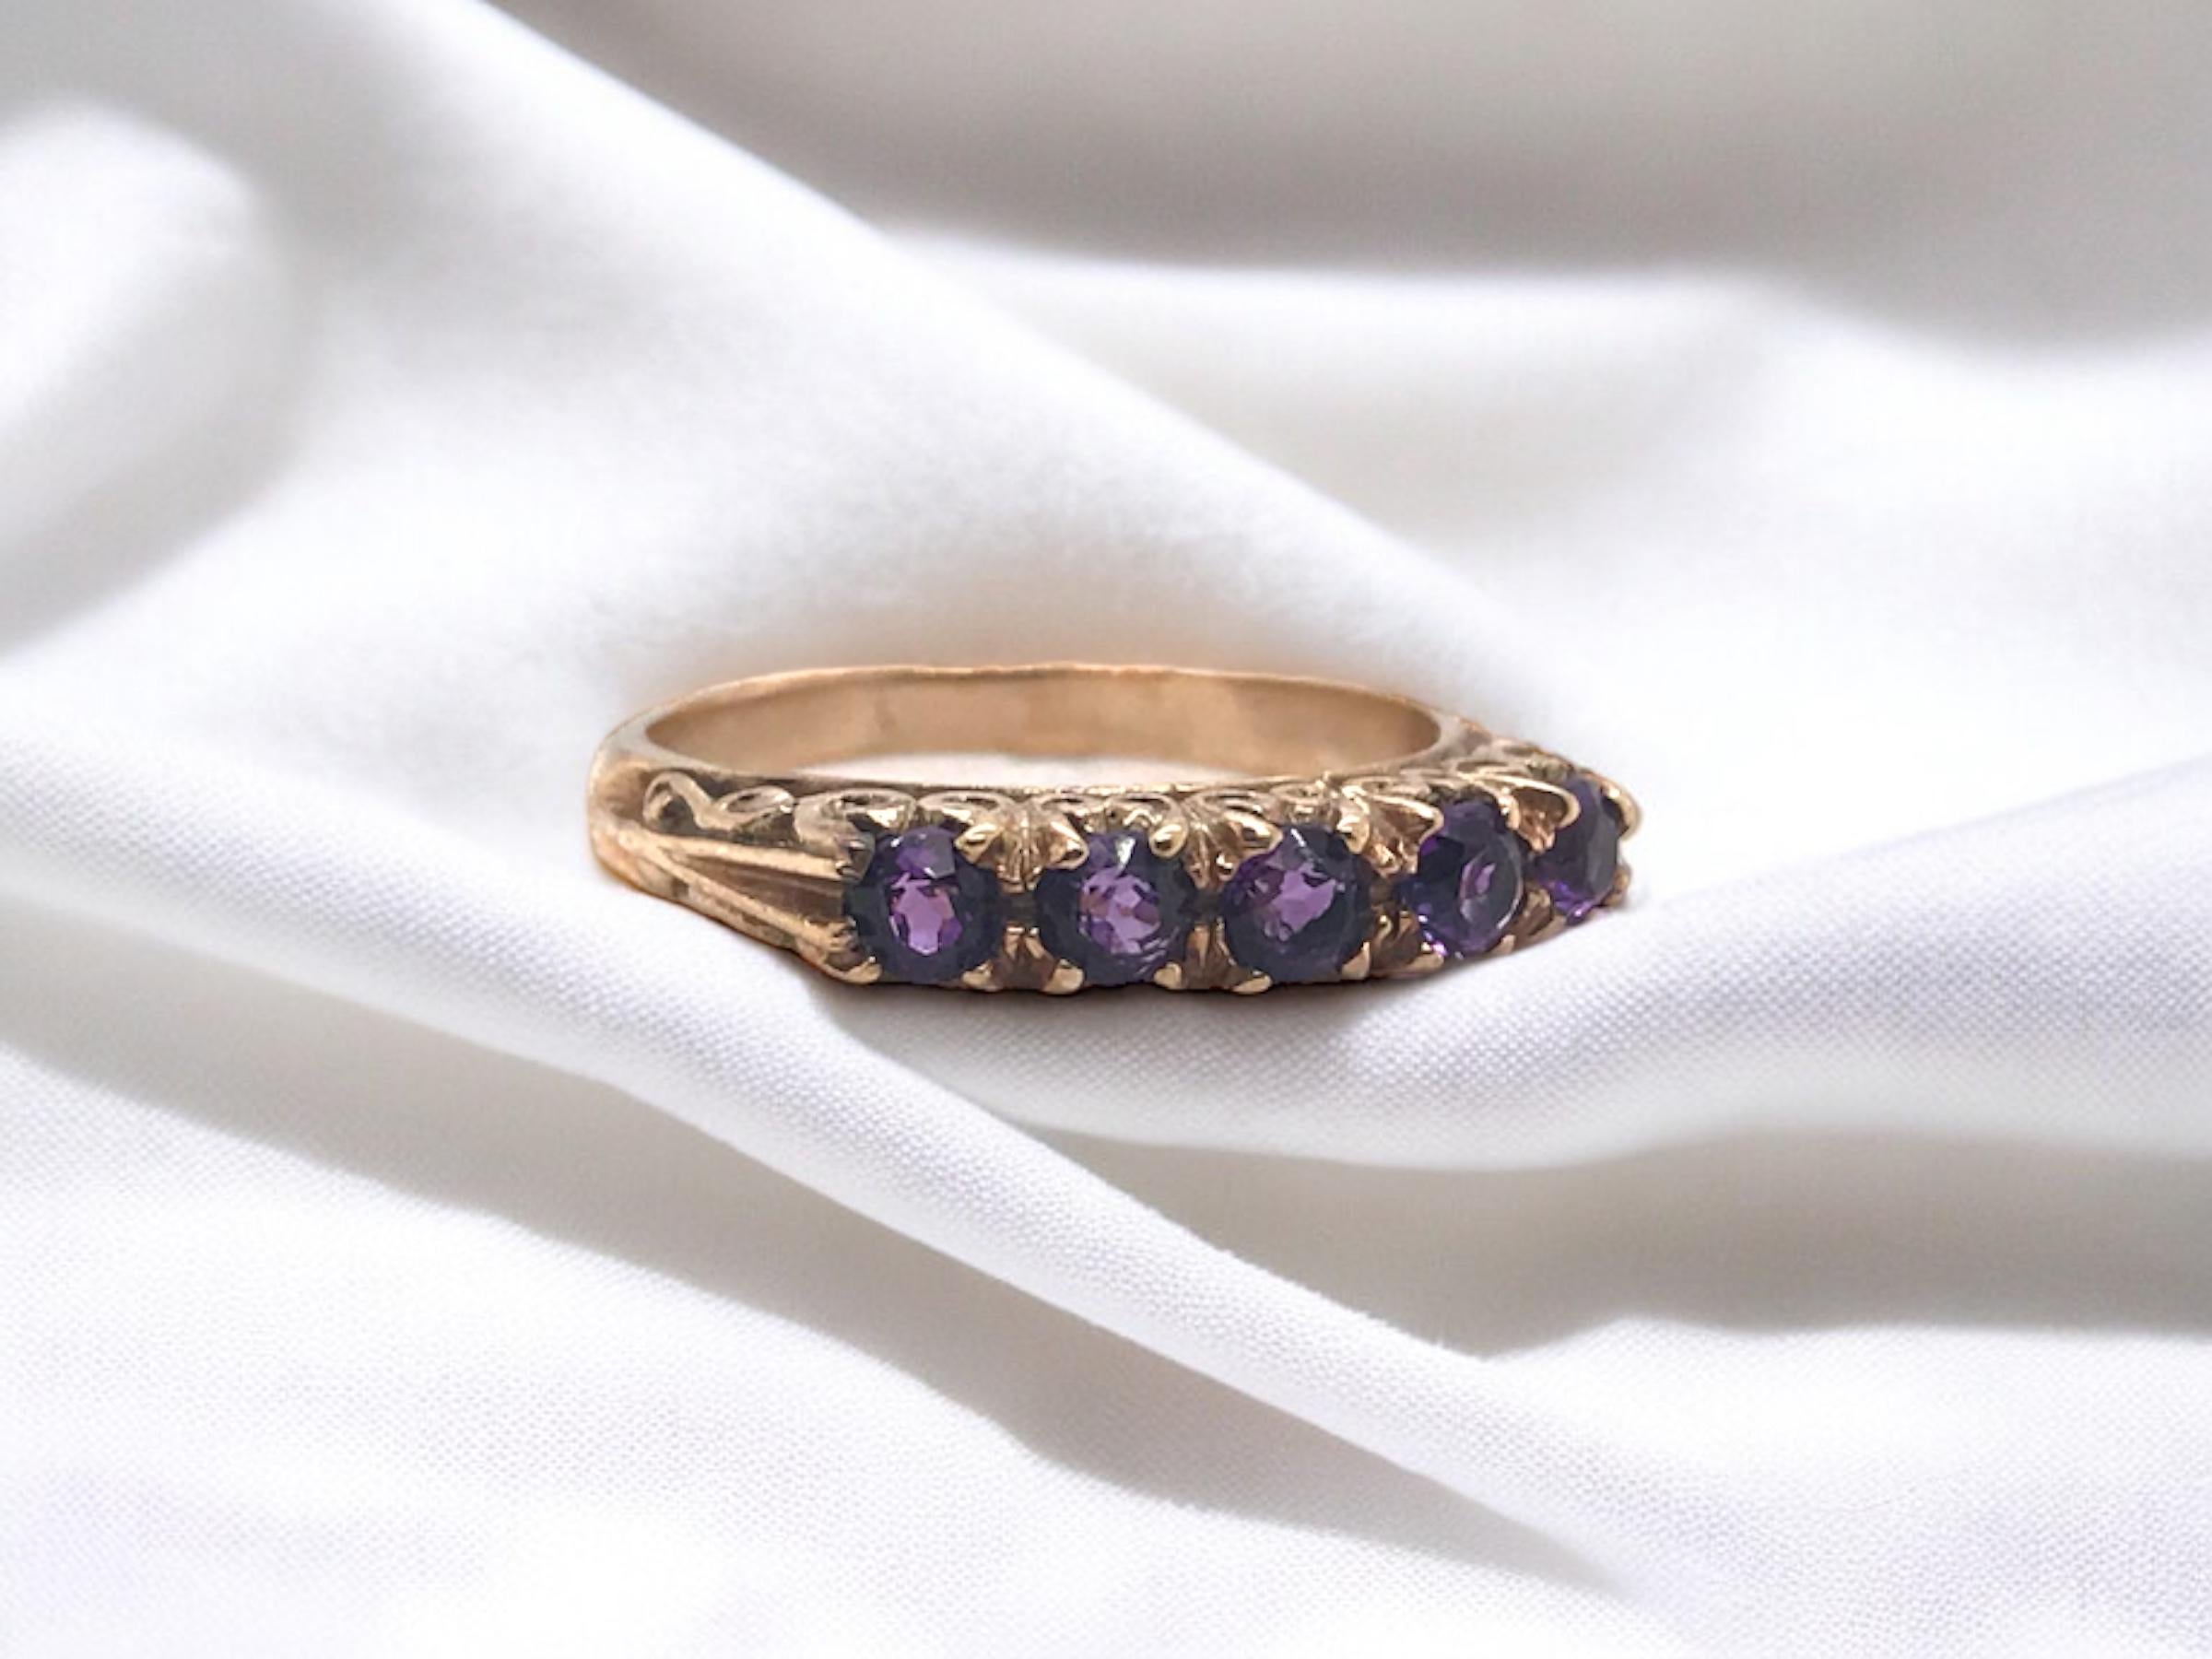 We love the scrollwork design on this vintage beauty!

Ring Details
Era: Victorian 1840 - 1900
Material: 9K Rose Gold
Shank Width: 3.0mm Tapering to 2.3mm
5 - 3.0mm Amethyst Gemstones
Height Off Finger: 4.0mm
Weight: 2.9 Grams
Finger Size: 6 1/2